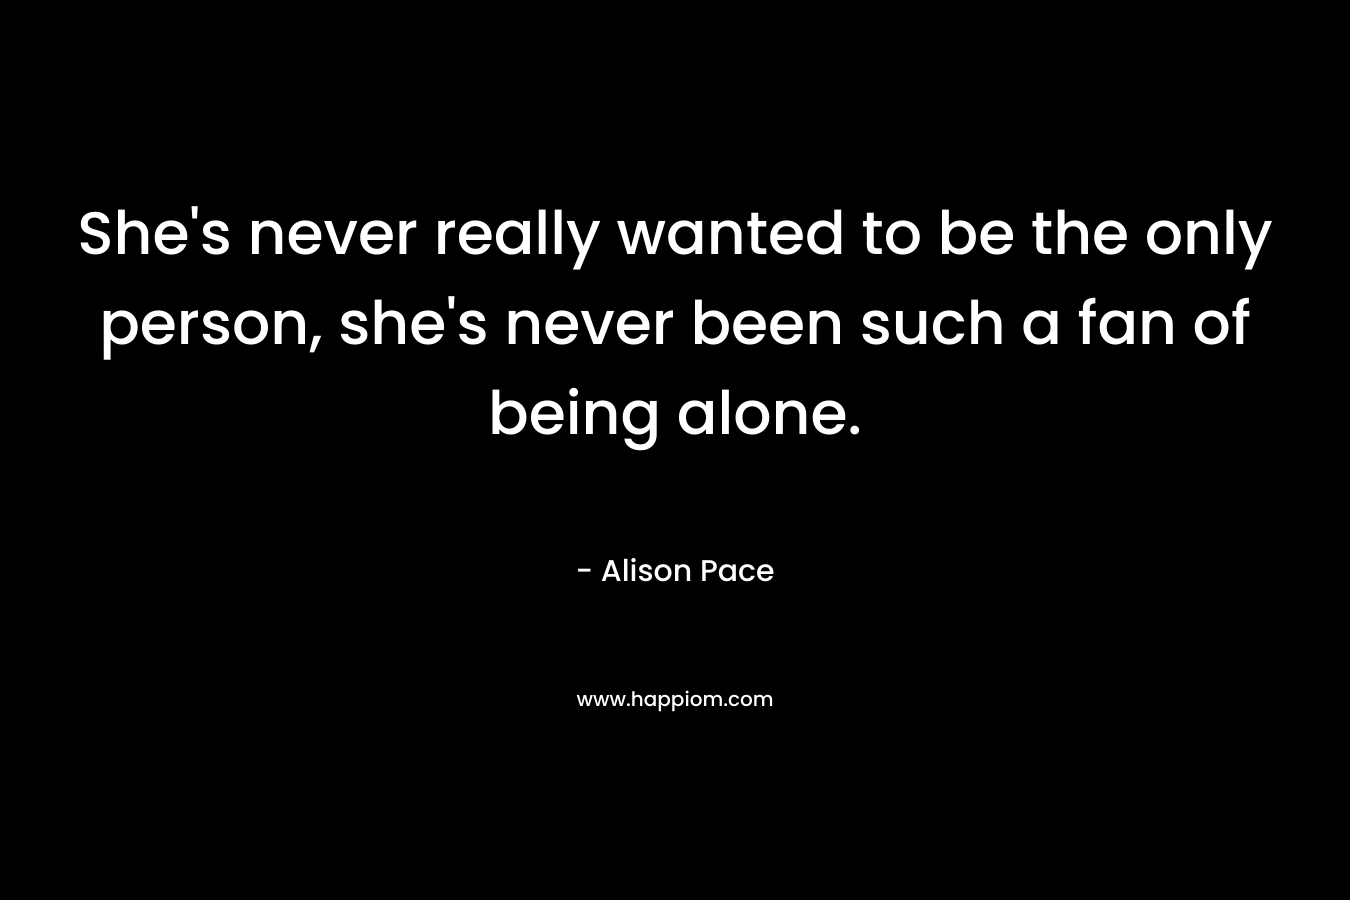 She's never really wanted to be the only person, she's never been such a fan of being alone.